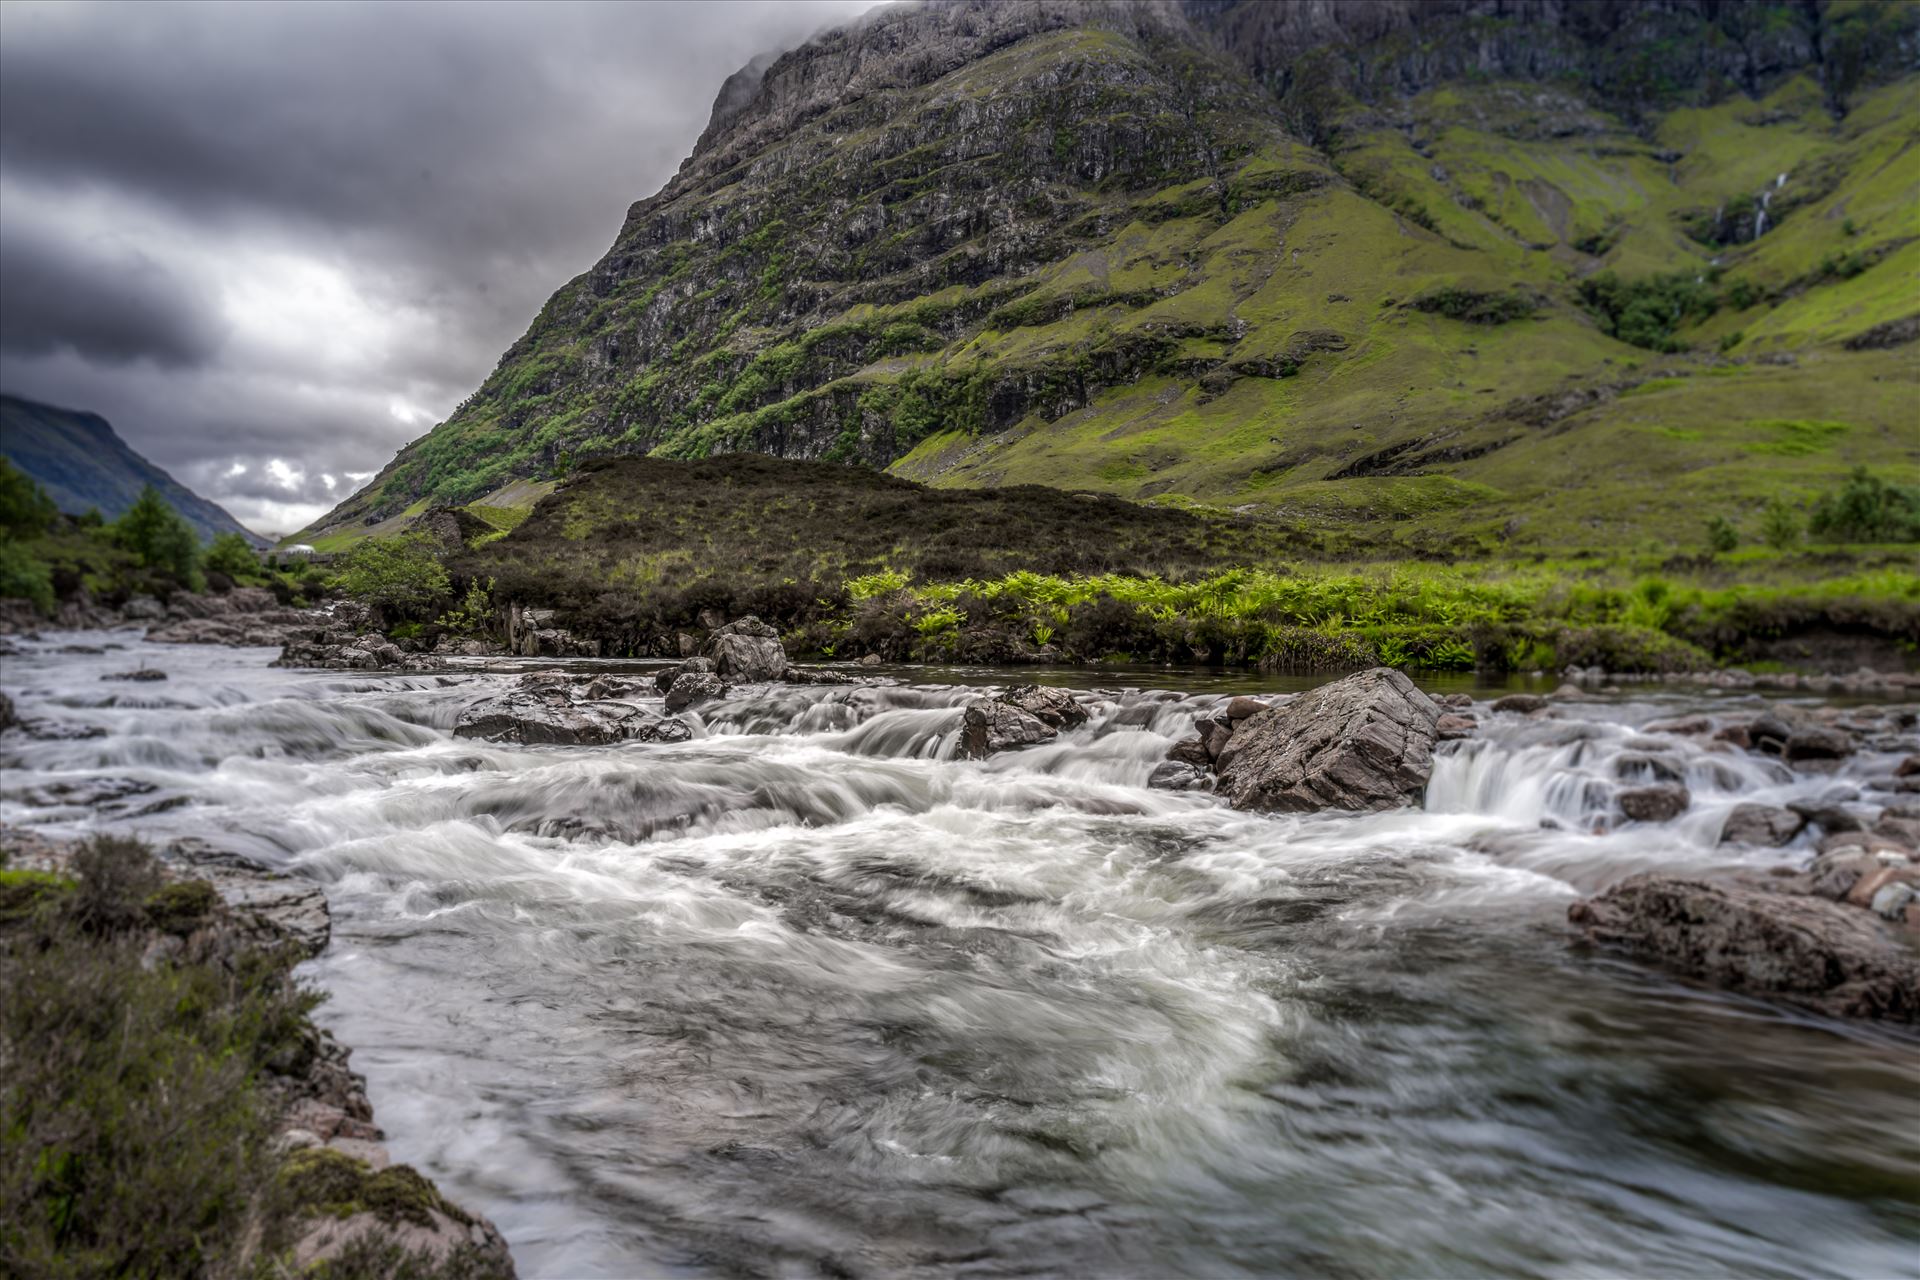 Clanhaig falls Clanhaig falls are located in the beautiful location of Glencoe in the Scottish Highlands. by philreay